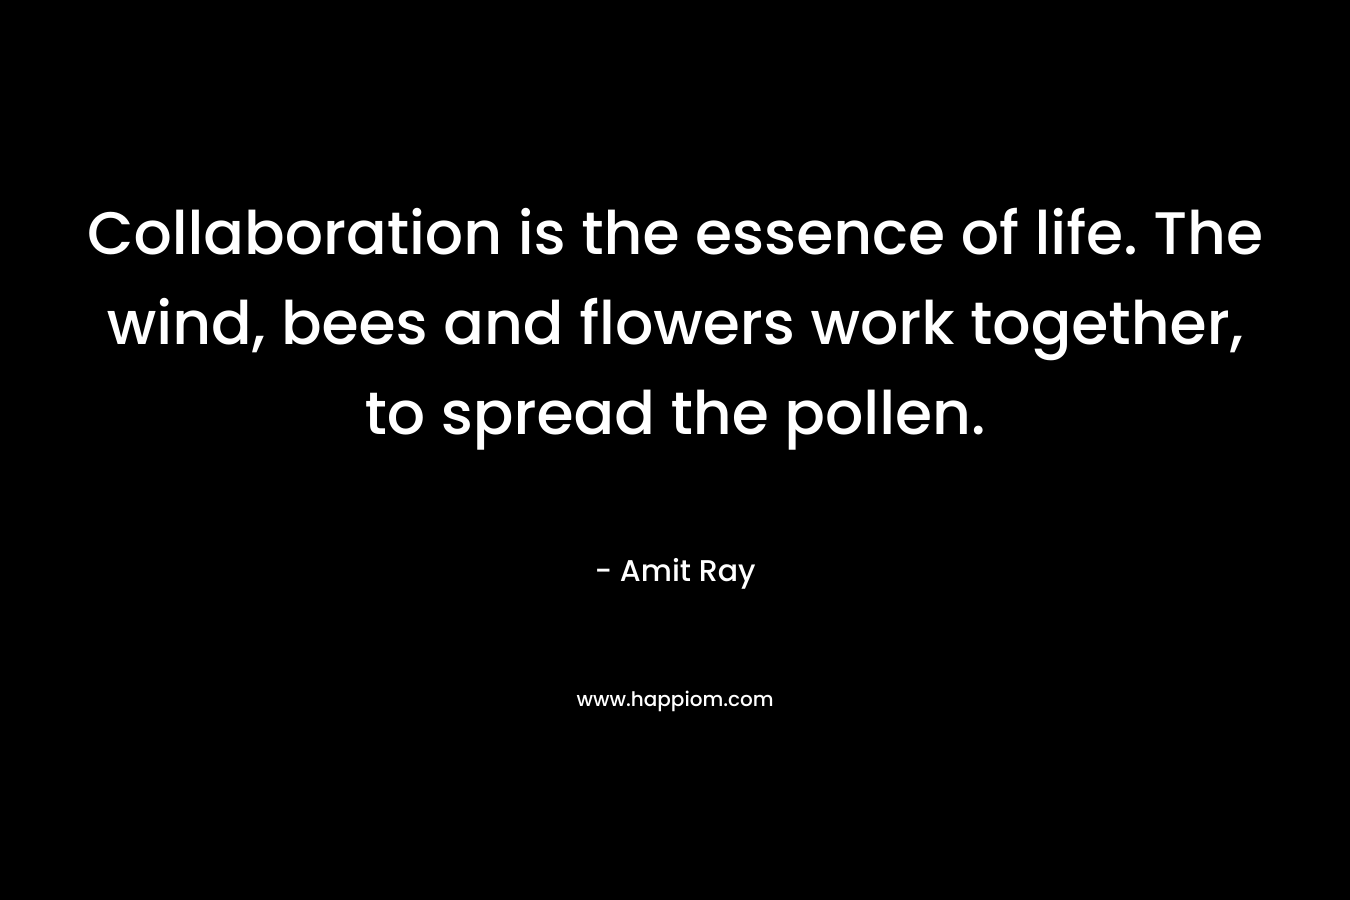 Collaboration is the essence of life. The wind, bees and flowers work together, to spread the pollen. – Amit Ray